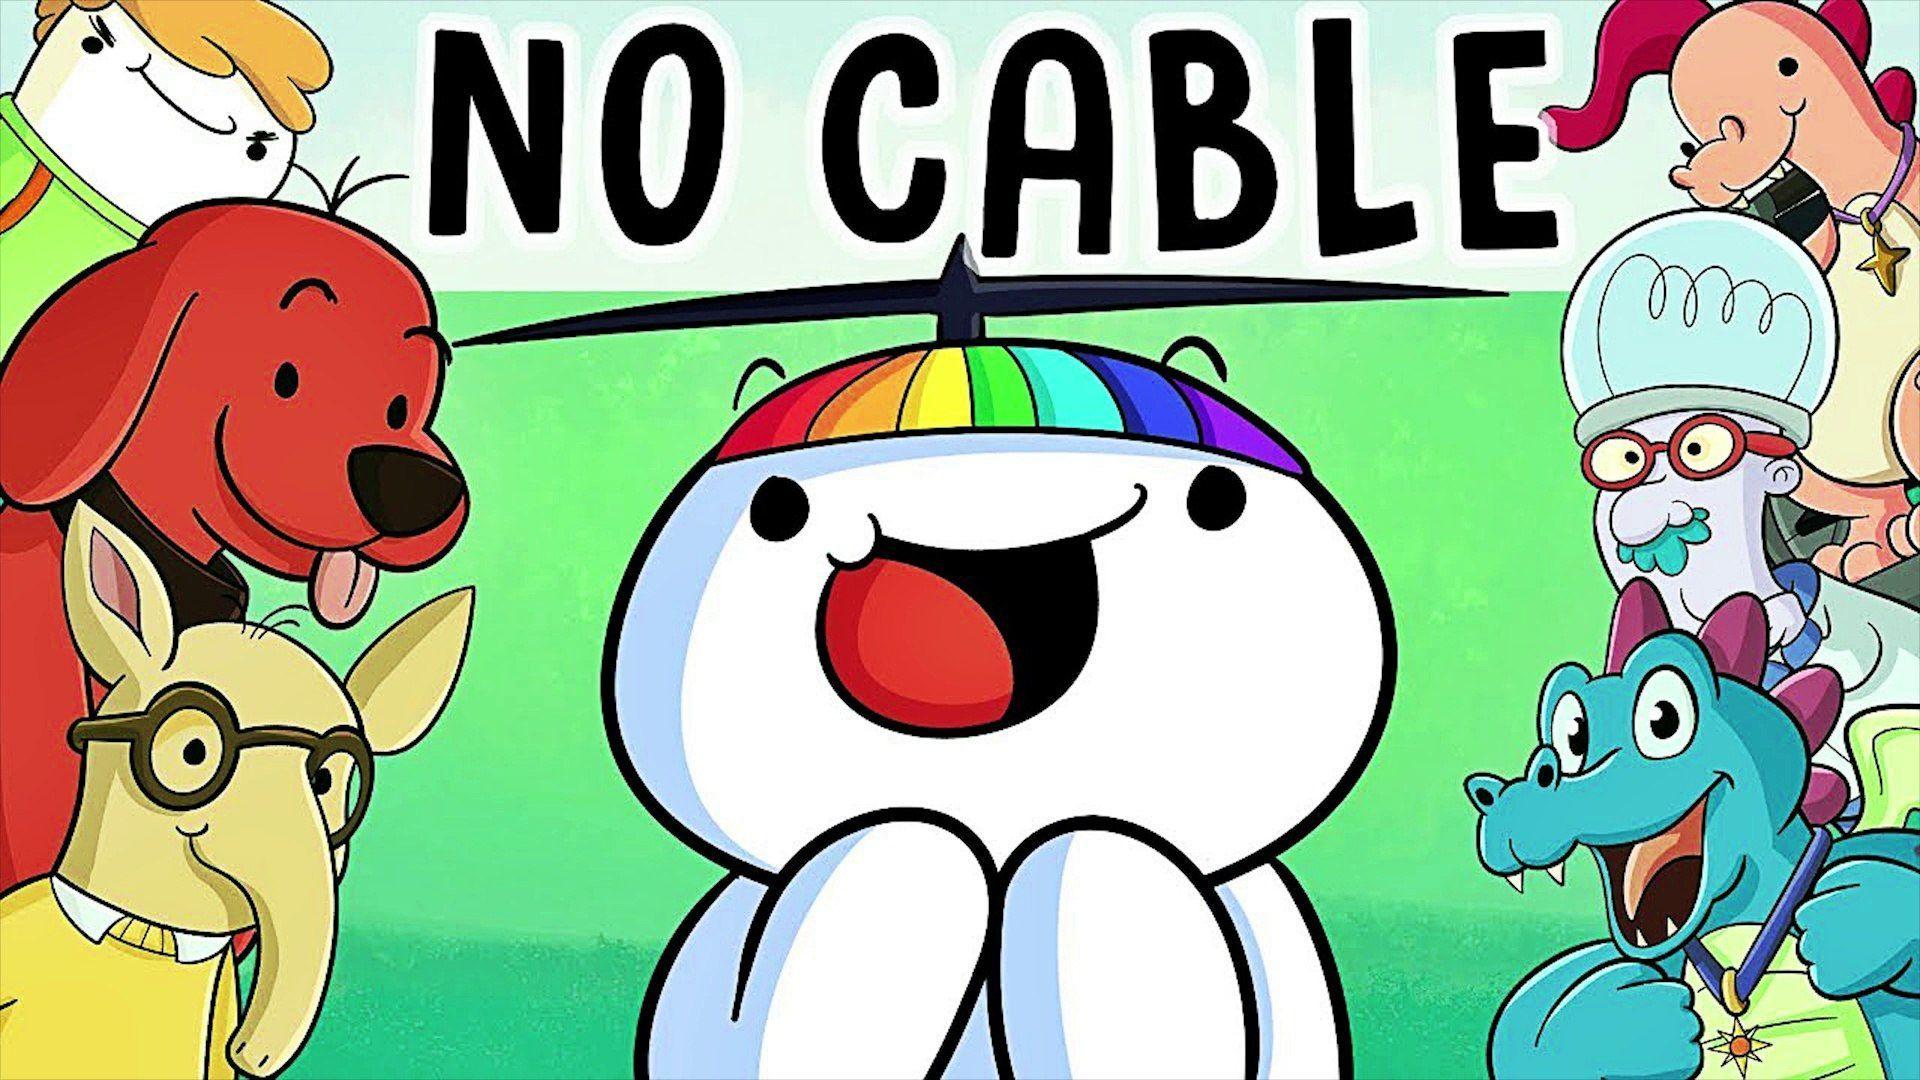 Theodd1sout Wallpapers Top Free Theodd1sout Backgrounds Wallpaperaccess 